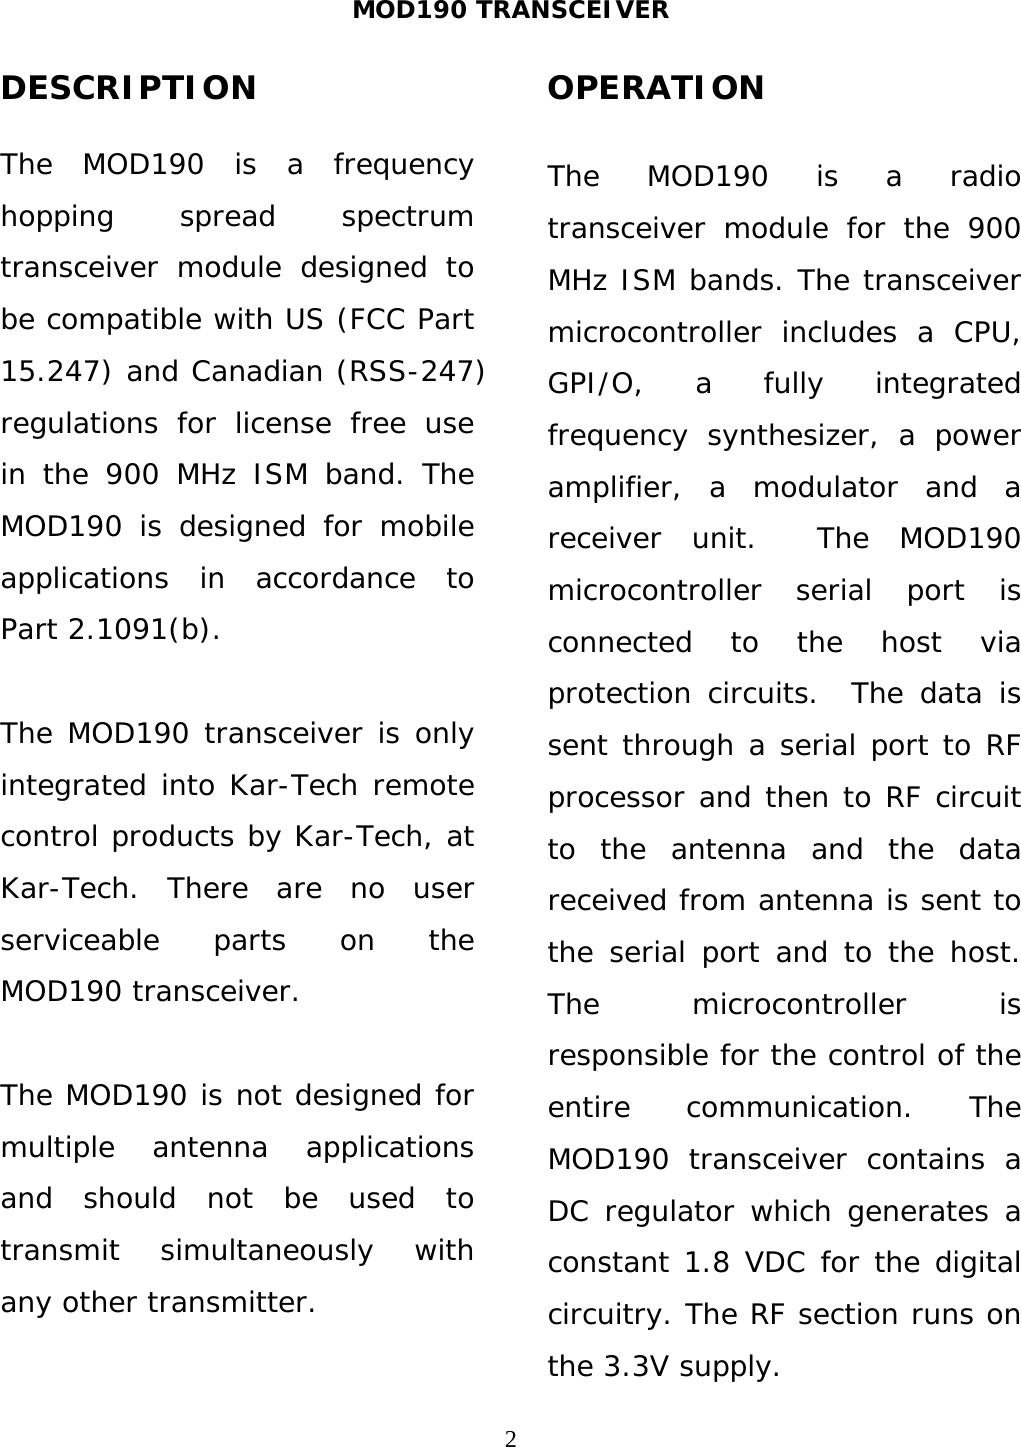 MOD190 TRANSCEIVER  2DESCRIPTION  The MOD190 is a frequency hopping spread spectrum transceiver module designed to be compatible with US (FCC Part 15.247) and Canadian (RSS-247) regulations for license free use in the 900 MHz ISM band. The MOD190 is designed for mobile applications in accordance to Part 2.1091(b).  The MOD190 transceiver is only integrated into Kar-Tech remote control products by Kar-Tech, at Kar-Tech. There are no user serviceable parts on the MOD190 transceiver.  The MOD190 is not designed for multiple antenna applications and should not be used to transmit simultaneously with any other transmitter.  OPERATION  The MOD190 is a radio transceiver module for the 900 MHz ISM bands. The transceiver microcontroller includes a CPU, GPI/O, a fully integrated frequency synthesizer, a power amplifier, a modulator and a receiver unit.  The MOD190 microcontroller serial port is connected to the host via protection circuits.  The data is sent through a serial port to RF processor and then to RF circuit to the antenna and the data received from antenna is sent to the serial port and to the host. The microcontroller is responsible for the control of the entire communication. The MOD190 transceiver contains a DC regulator which generates a constant 1.8 VDC for the digital circuitry. The RF section runs on the 3.3V supply. 